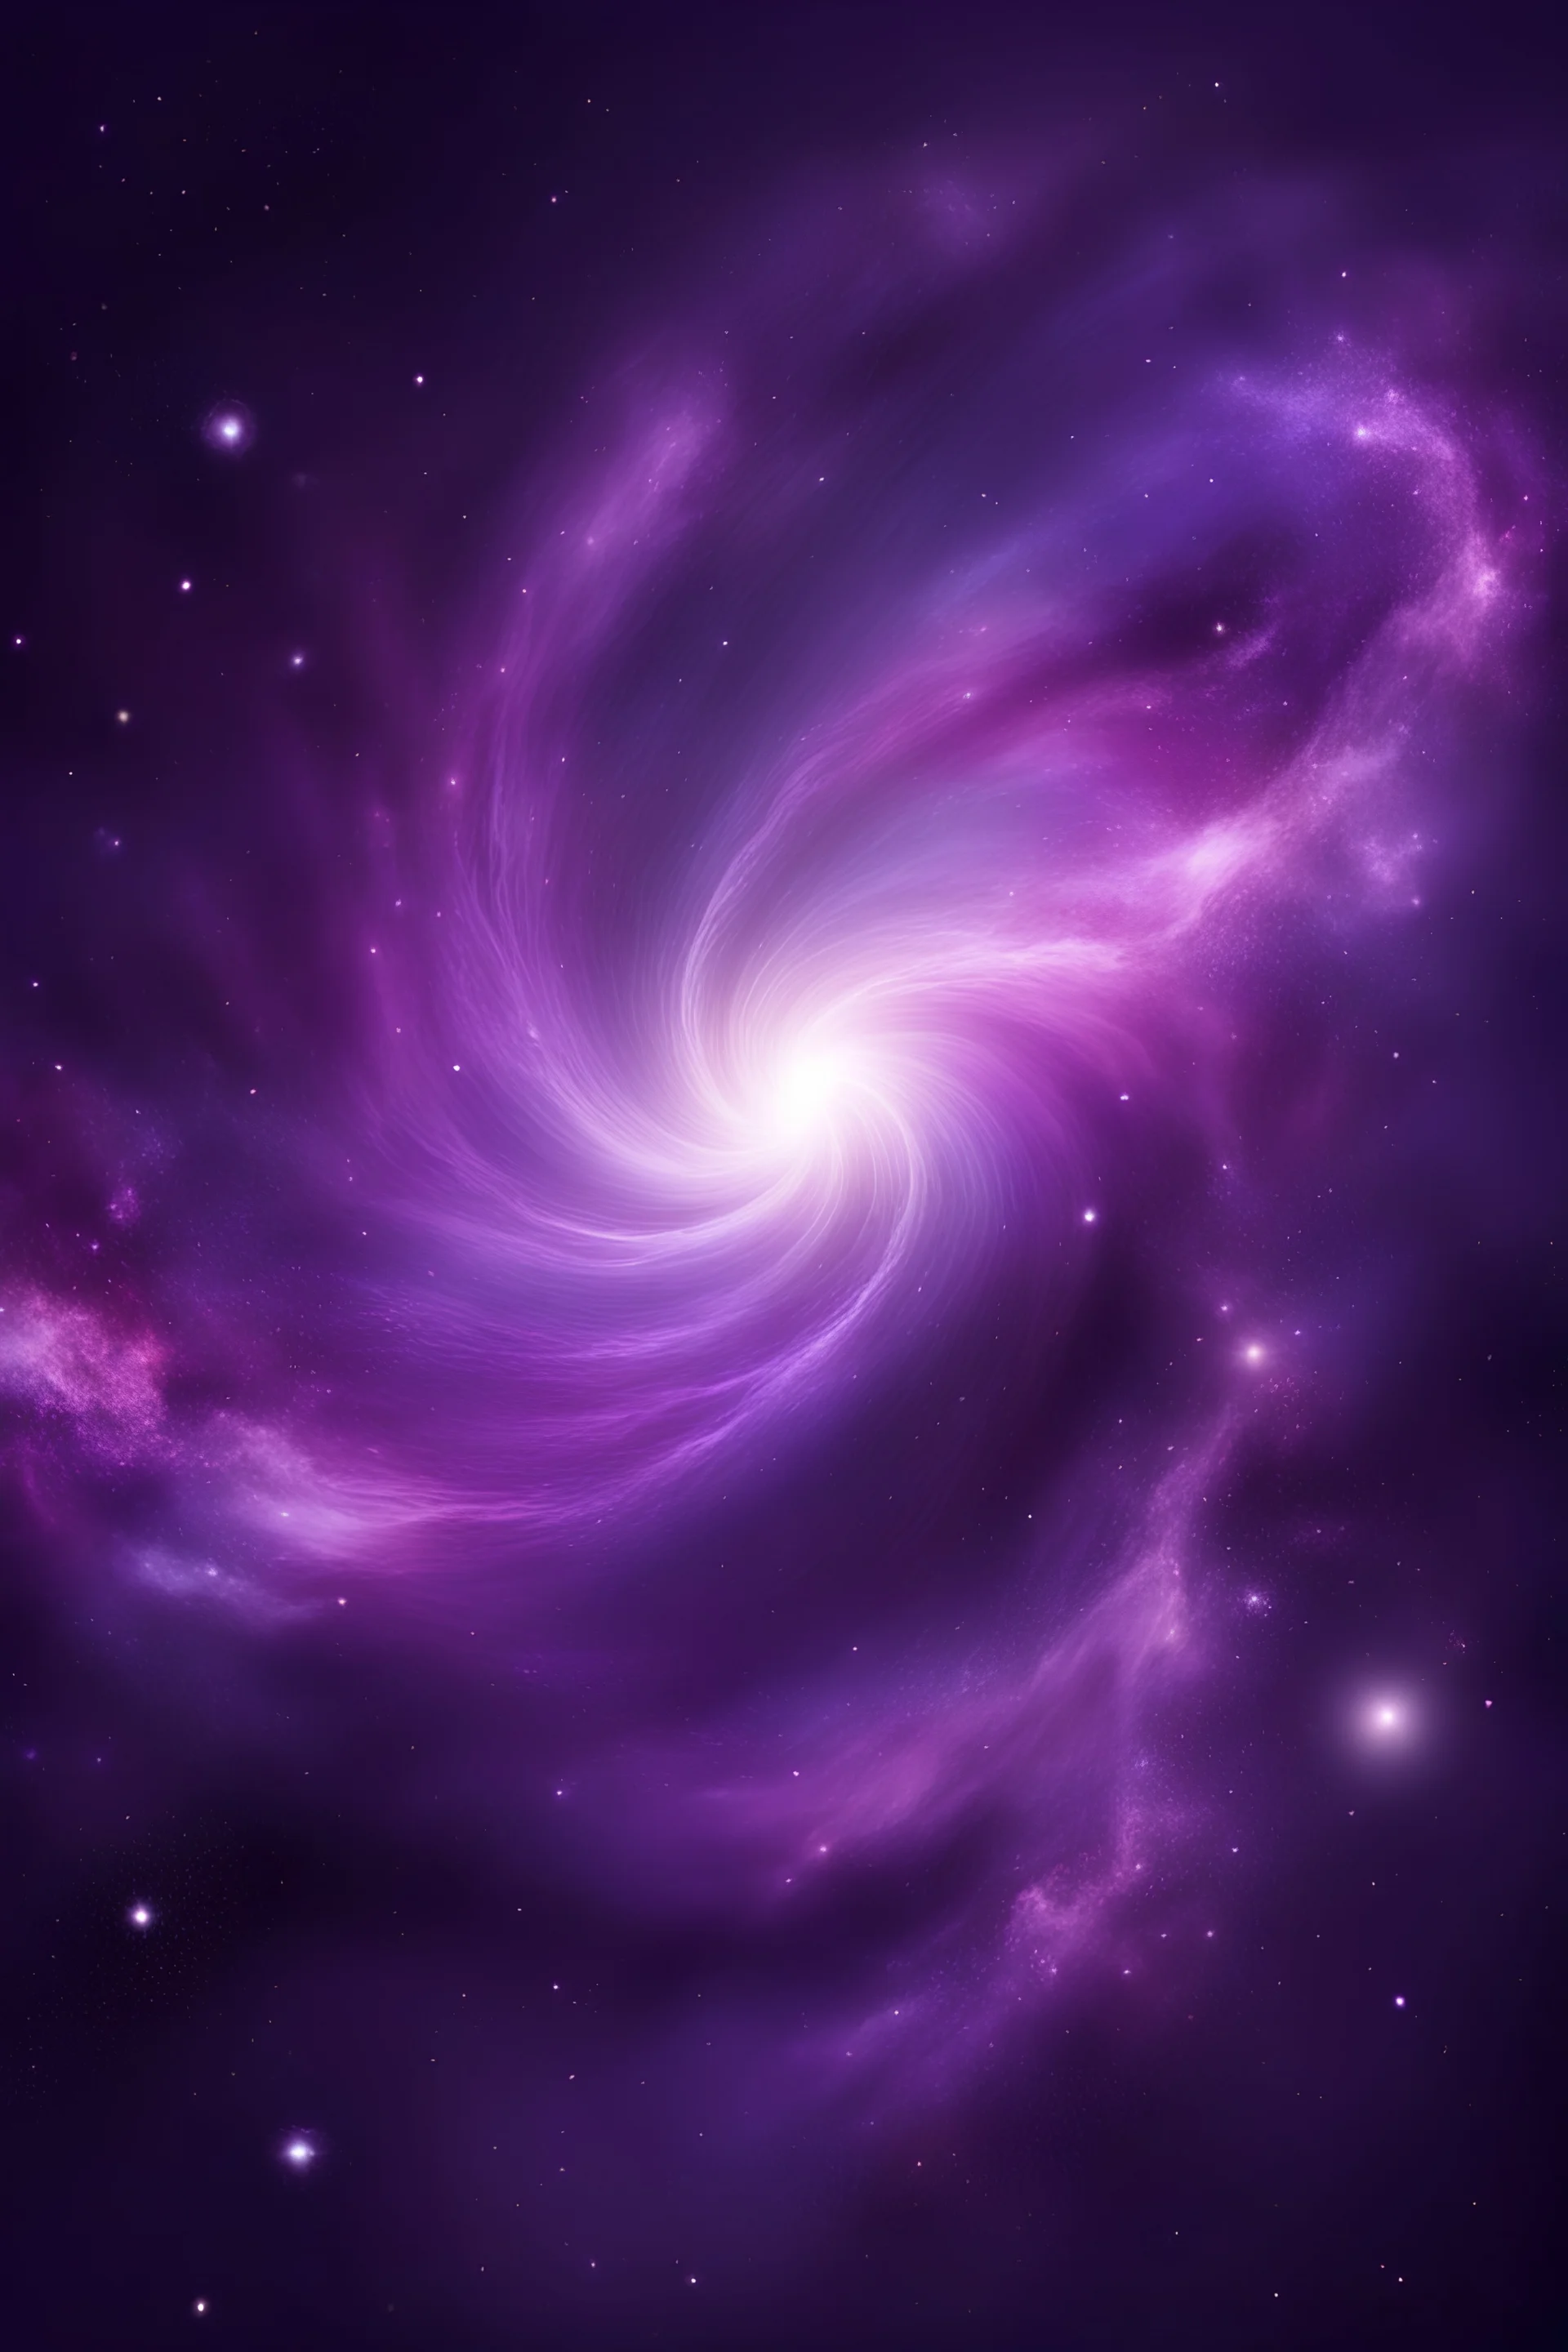 purple galaxy abstract background